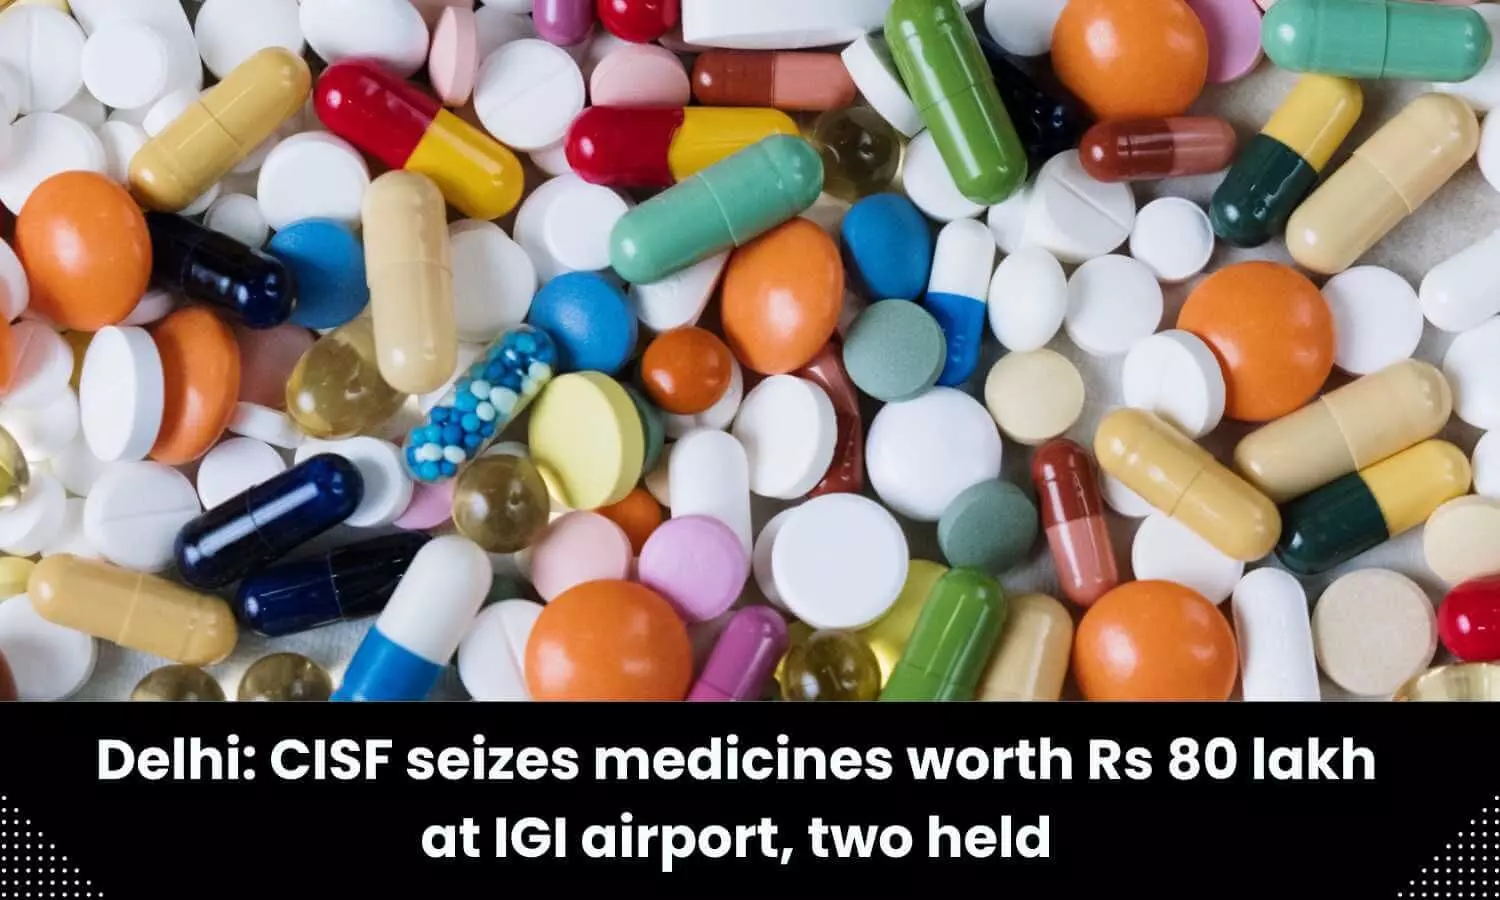 CISF seizes medicines worth Rs 80 lakh at IGI airport, two held